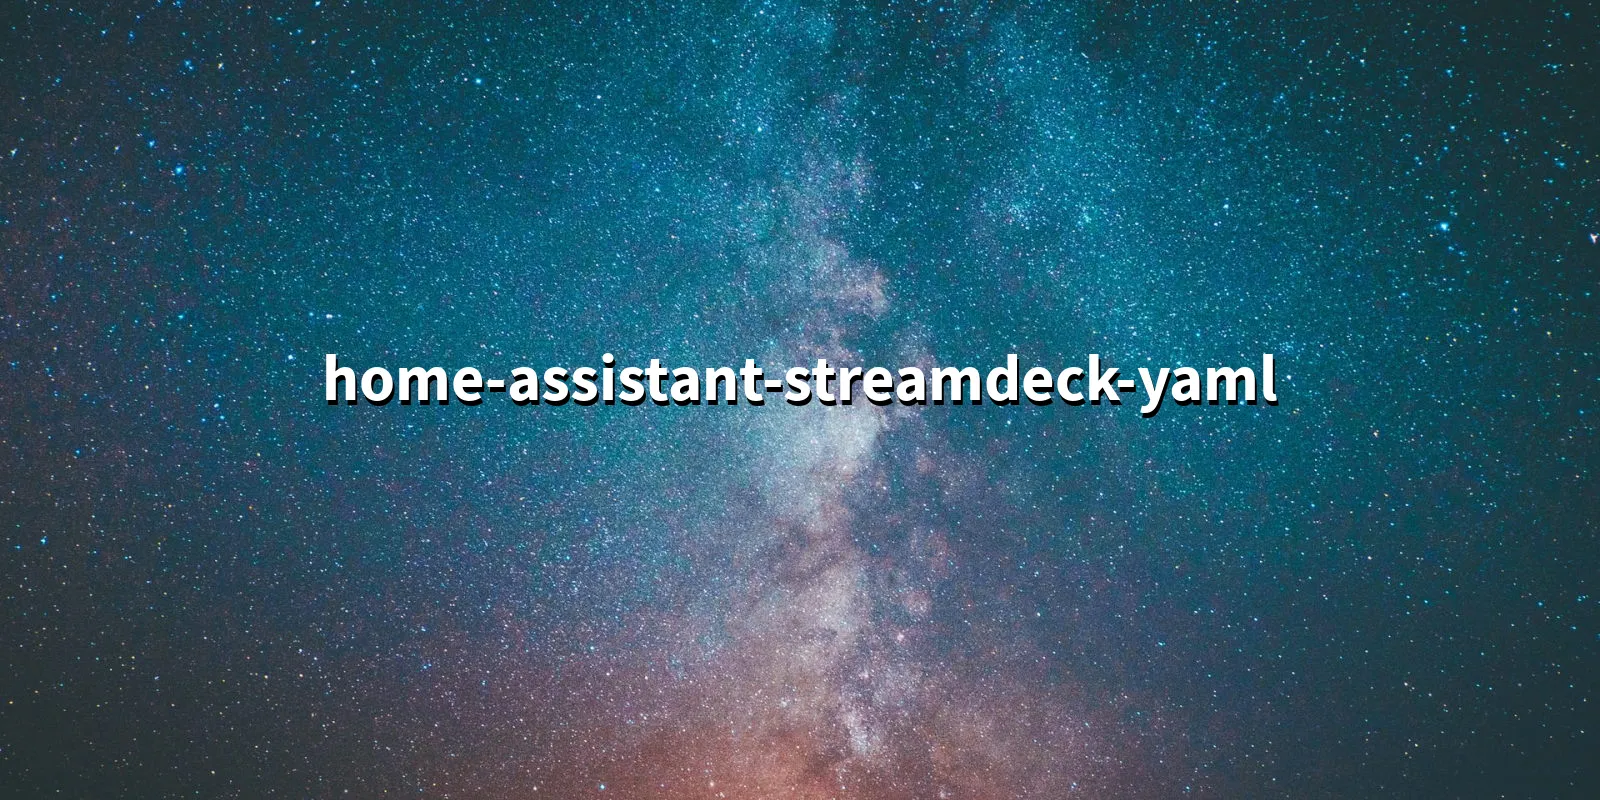 /pkg/h/home-assistant-streamdeck-yaml/home-assistant-streamdeck-yaml-banner.webp